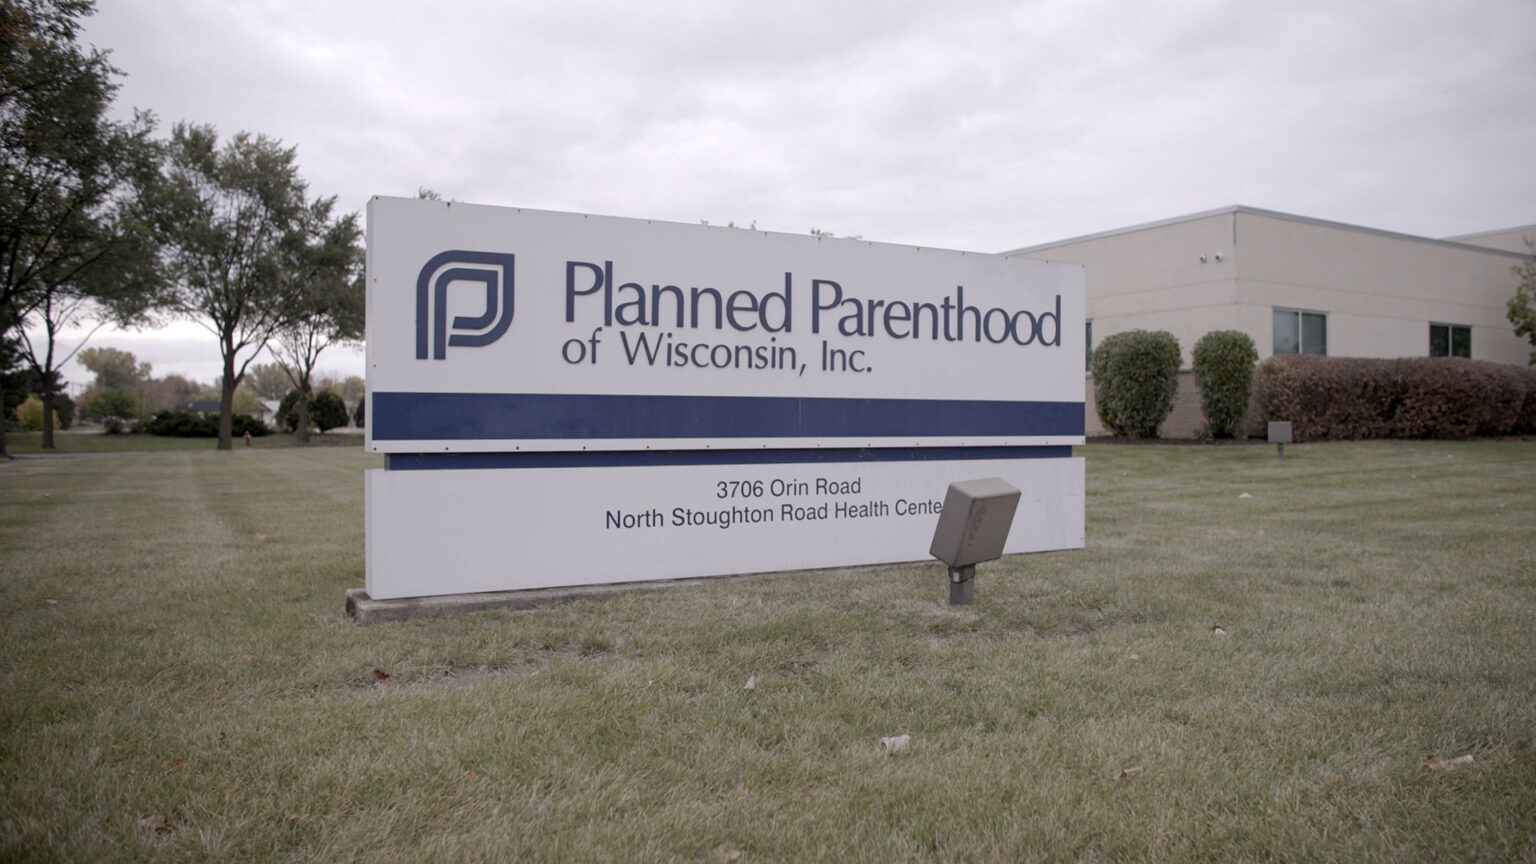 A sign reading Planned Parenthood of Wisconsin, Inc. with an address stands in front of a single-story building surrounded by a lawn, bushes and trees.